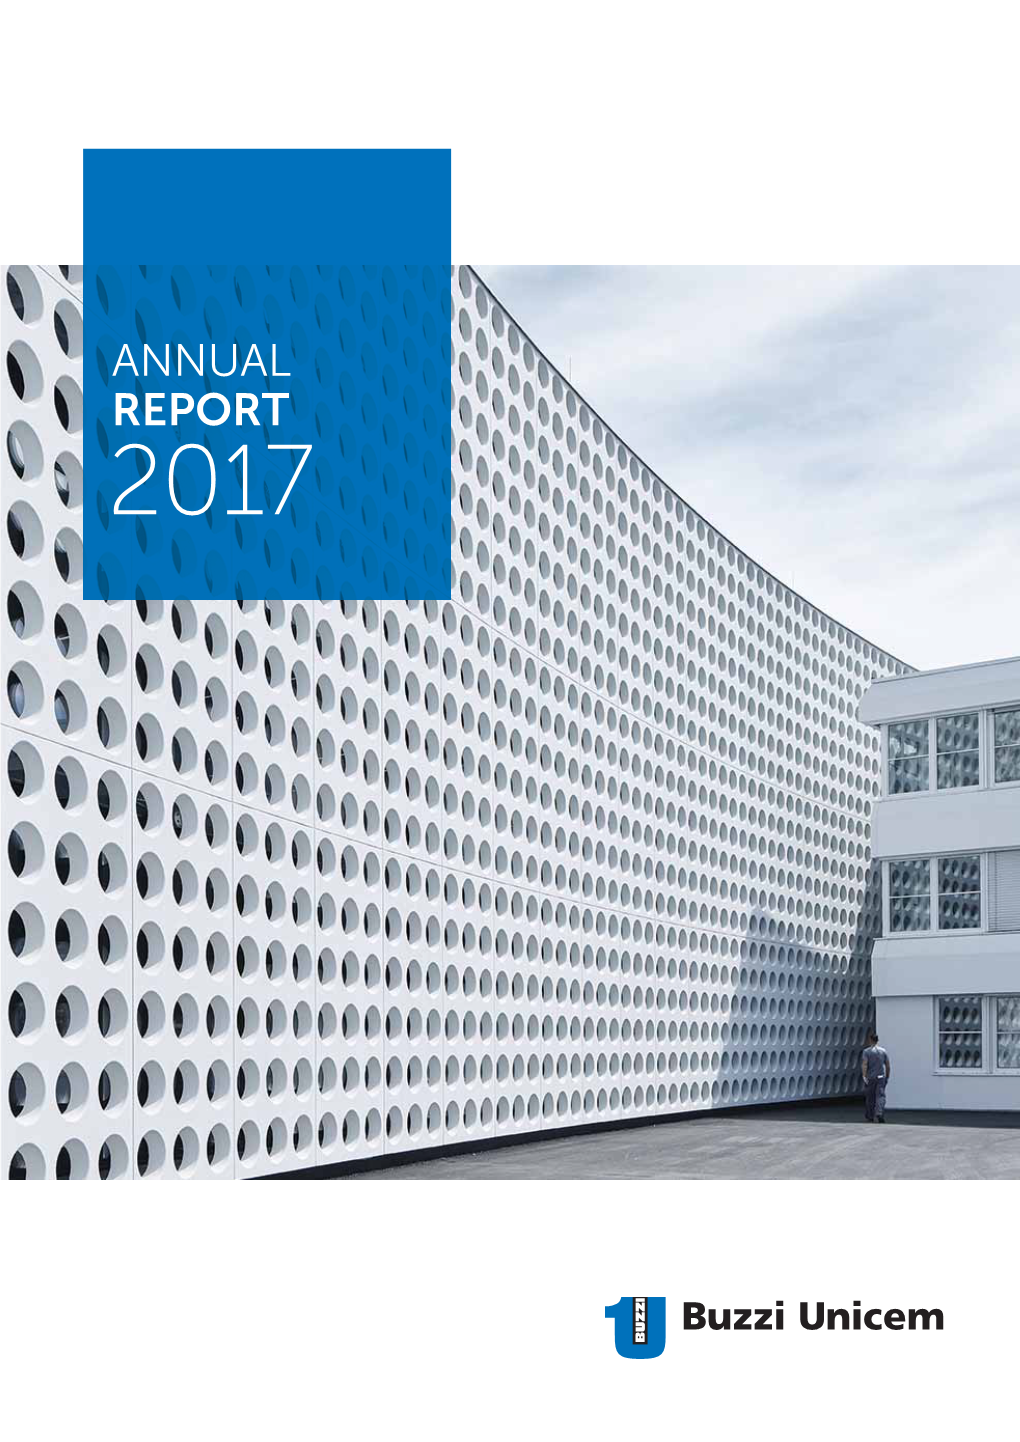 ANNUAL REPORT 2017 Buzzi Unicem Is an International Multiregional, “Heavy-Side“ Group, Focused on Cement, Ready-Mix Concrete and Aggregates